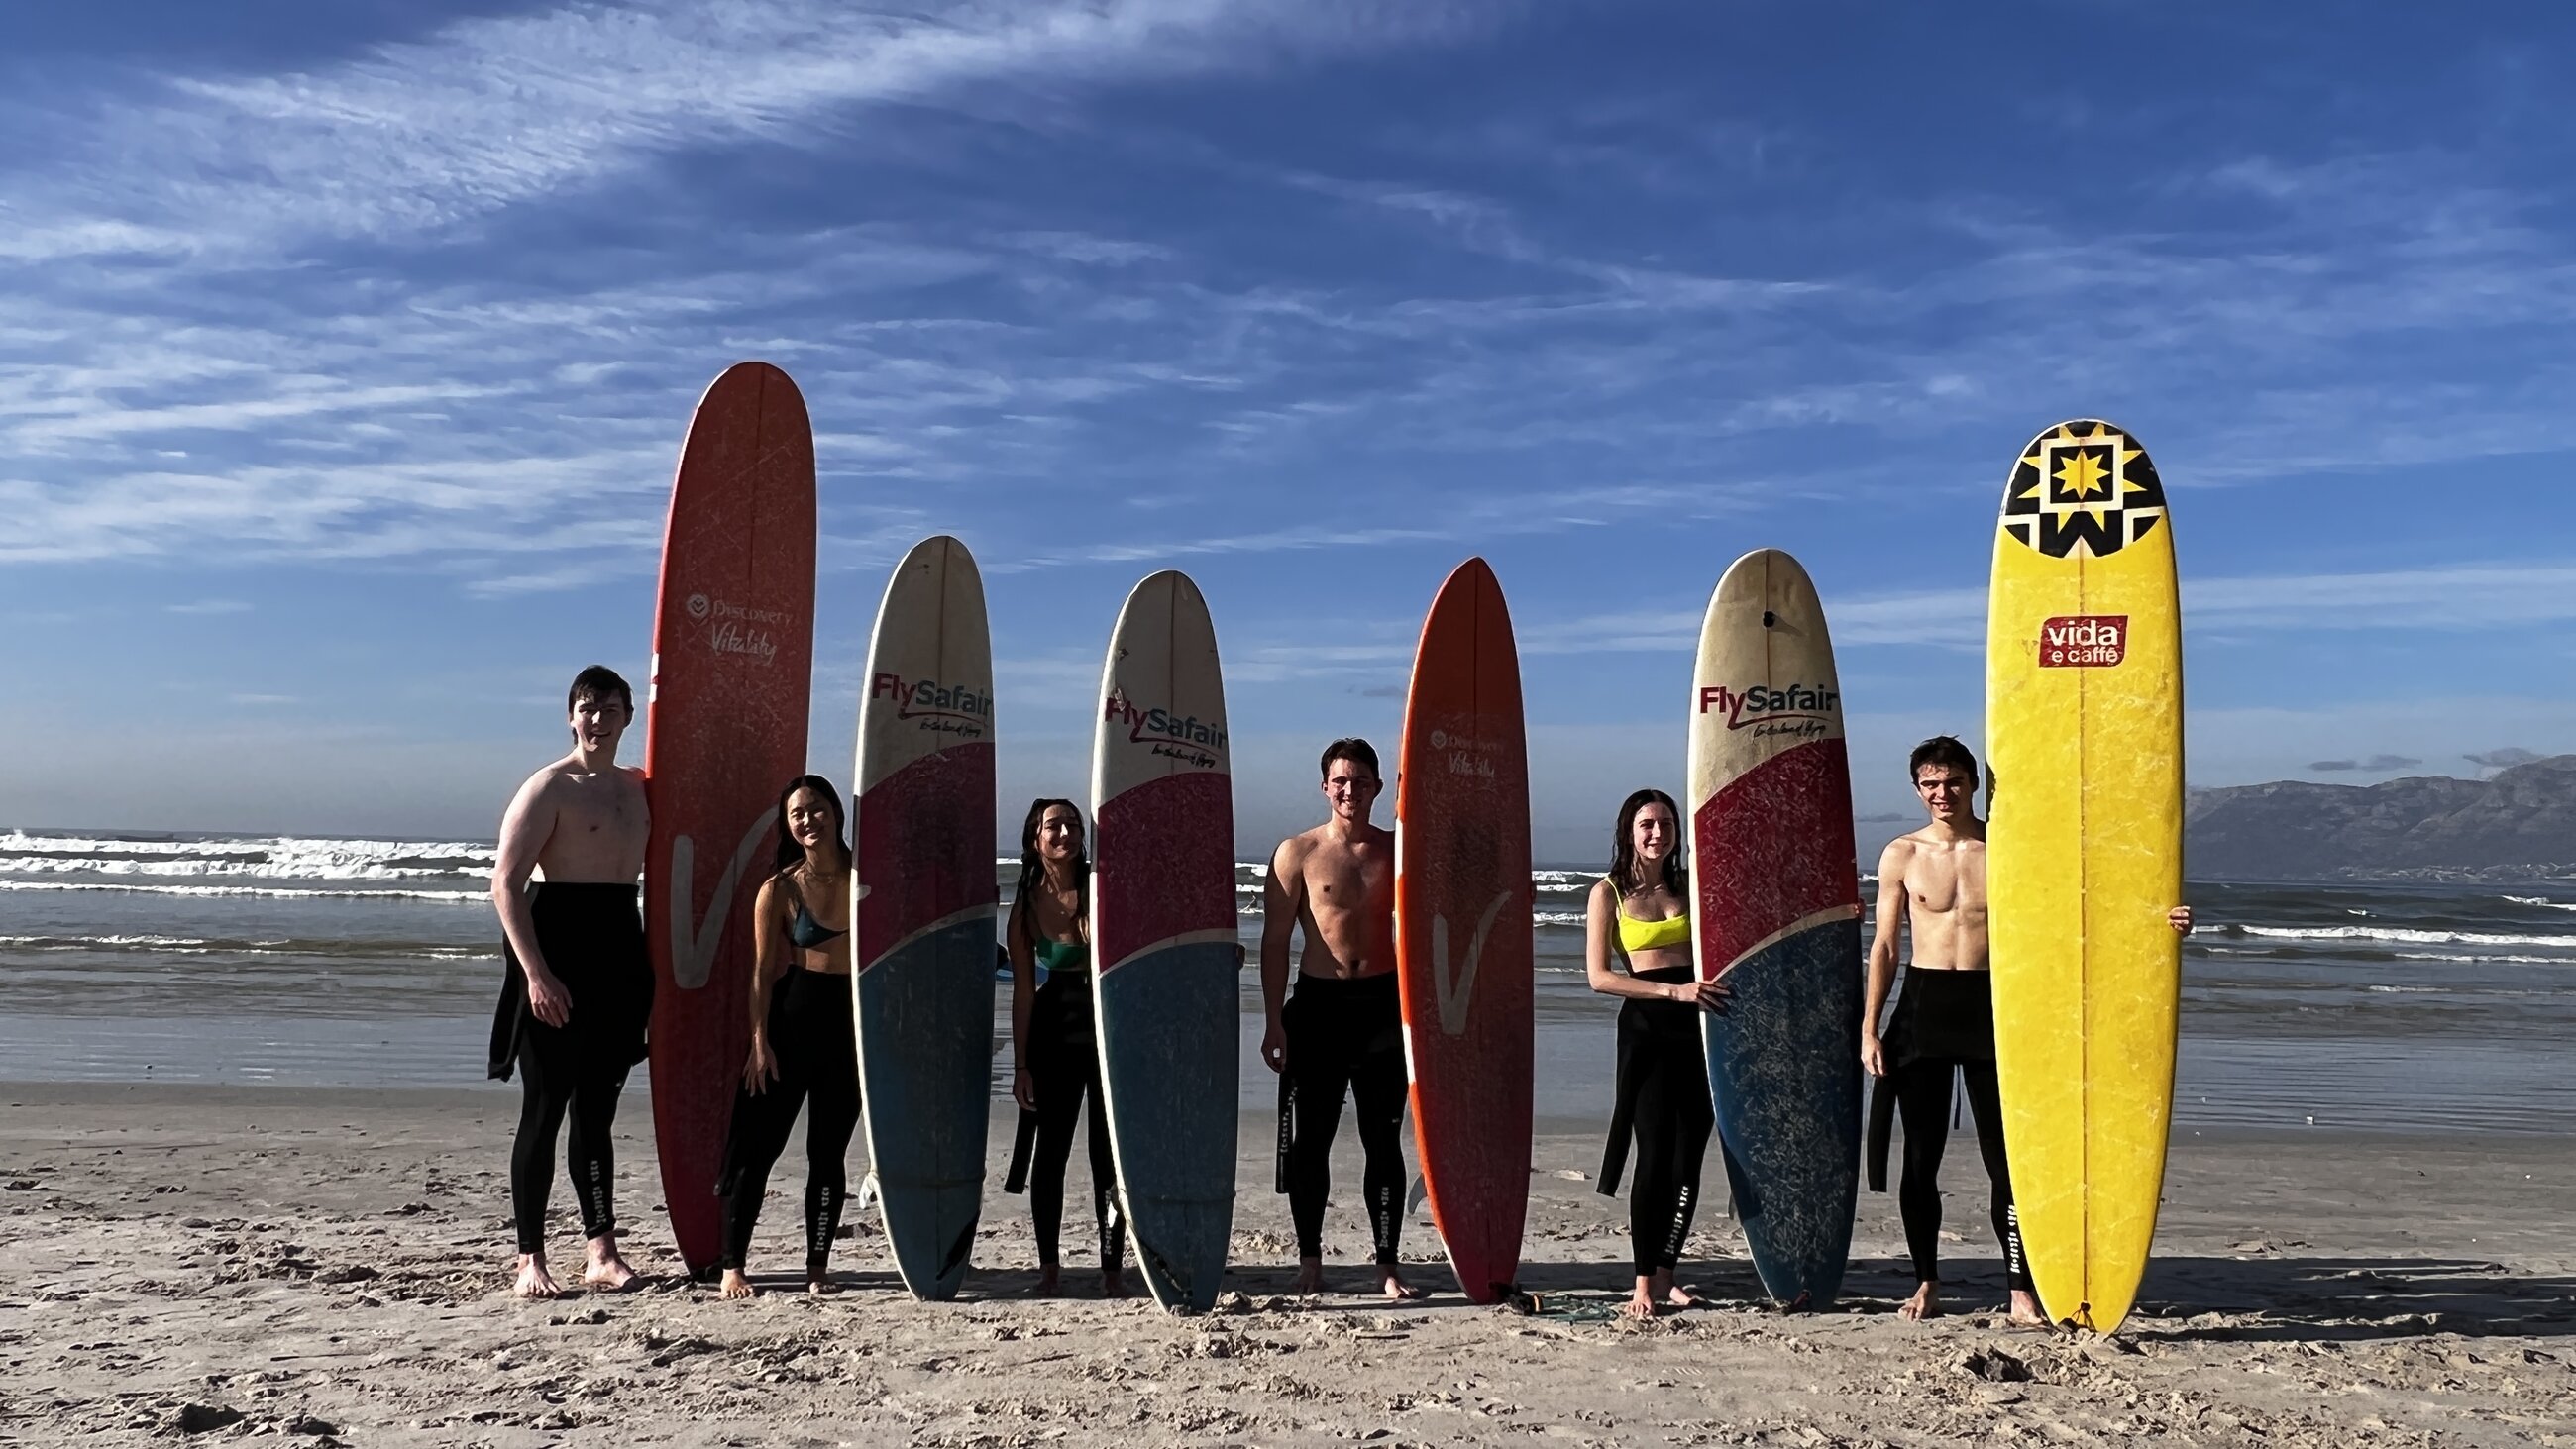 After a fun morning at surfing in Muizenberg!